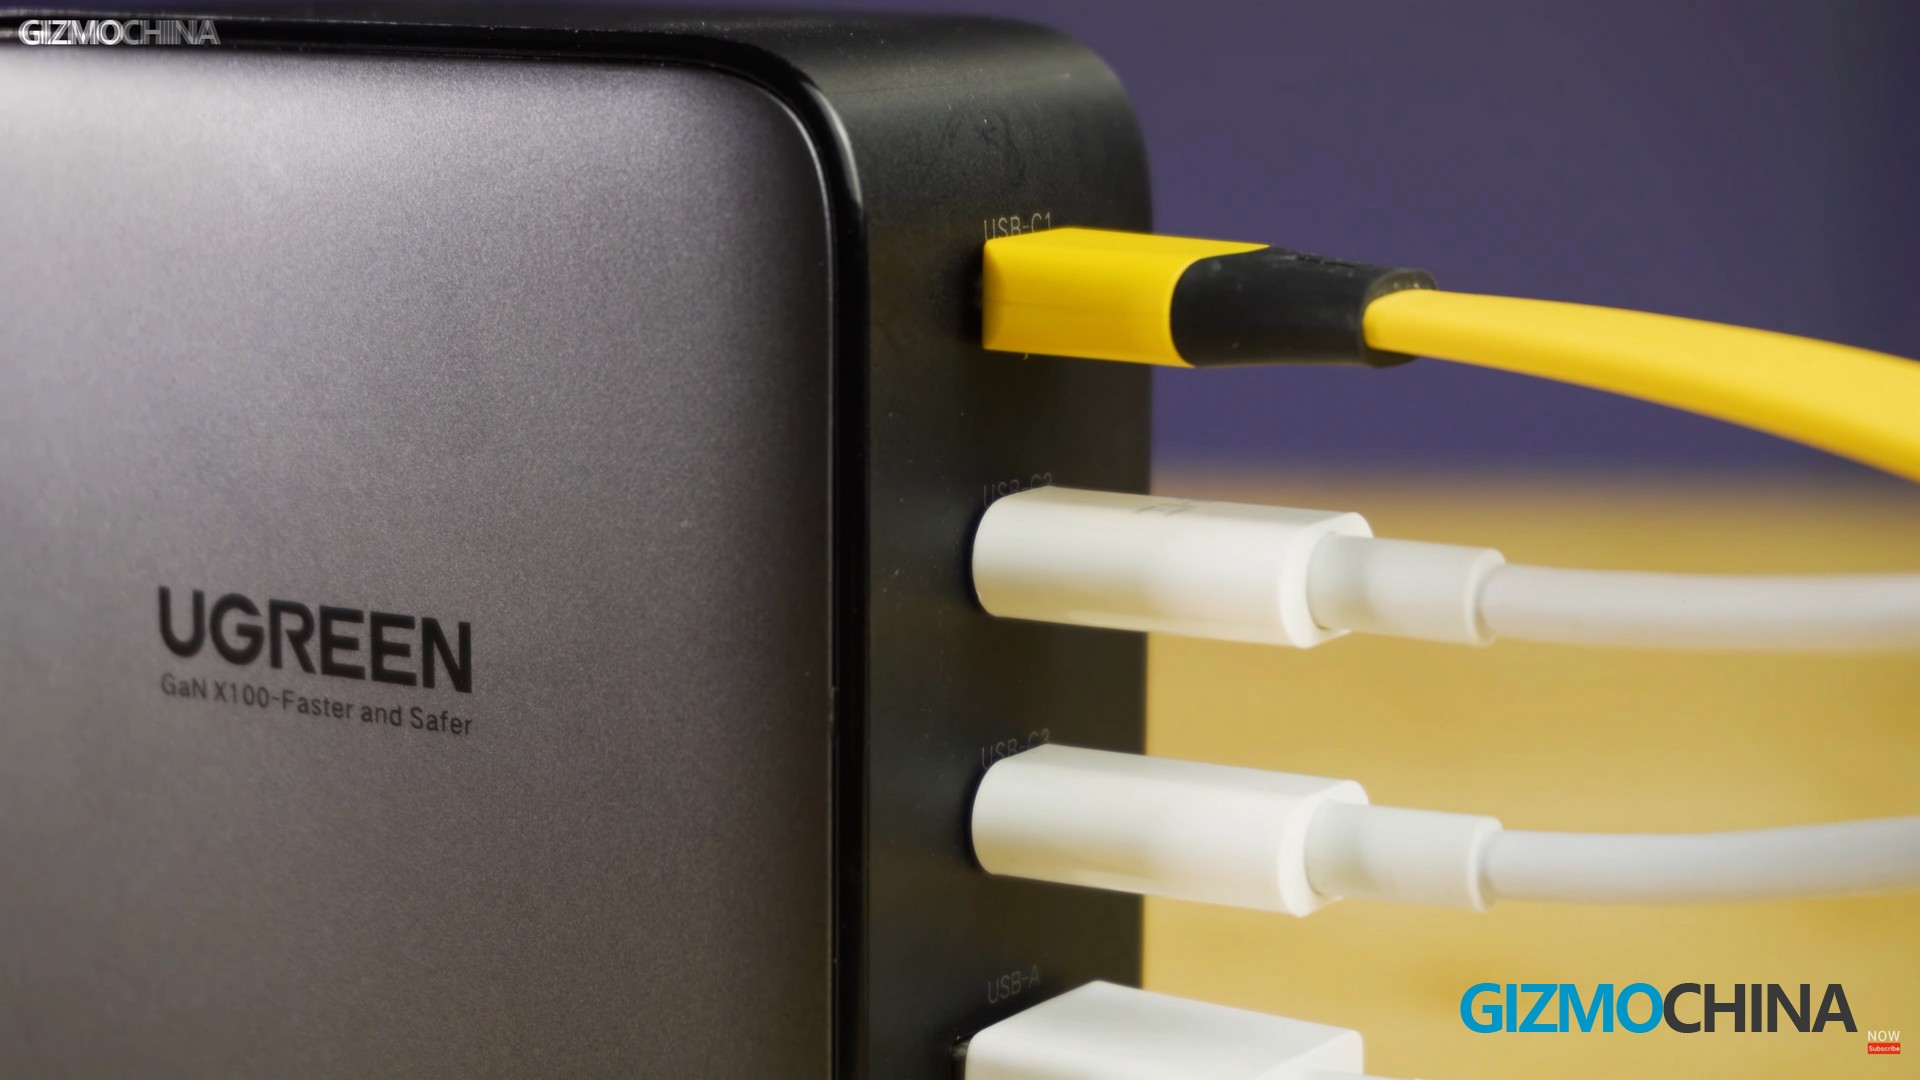 We love Ugreen's GaN USB-C chargers, and they're 40% off this week